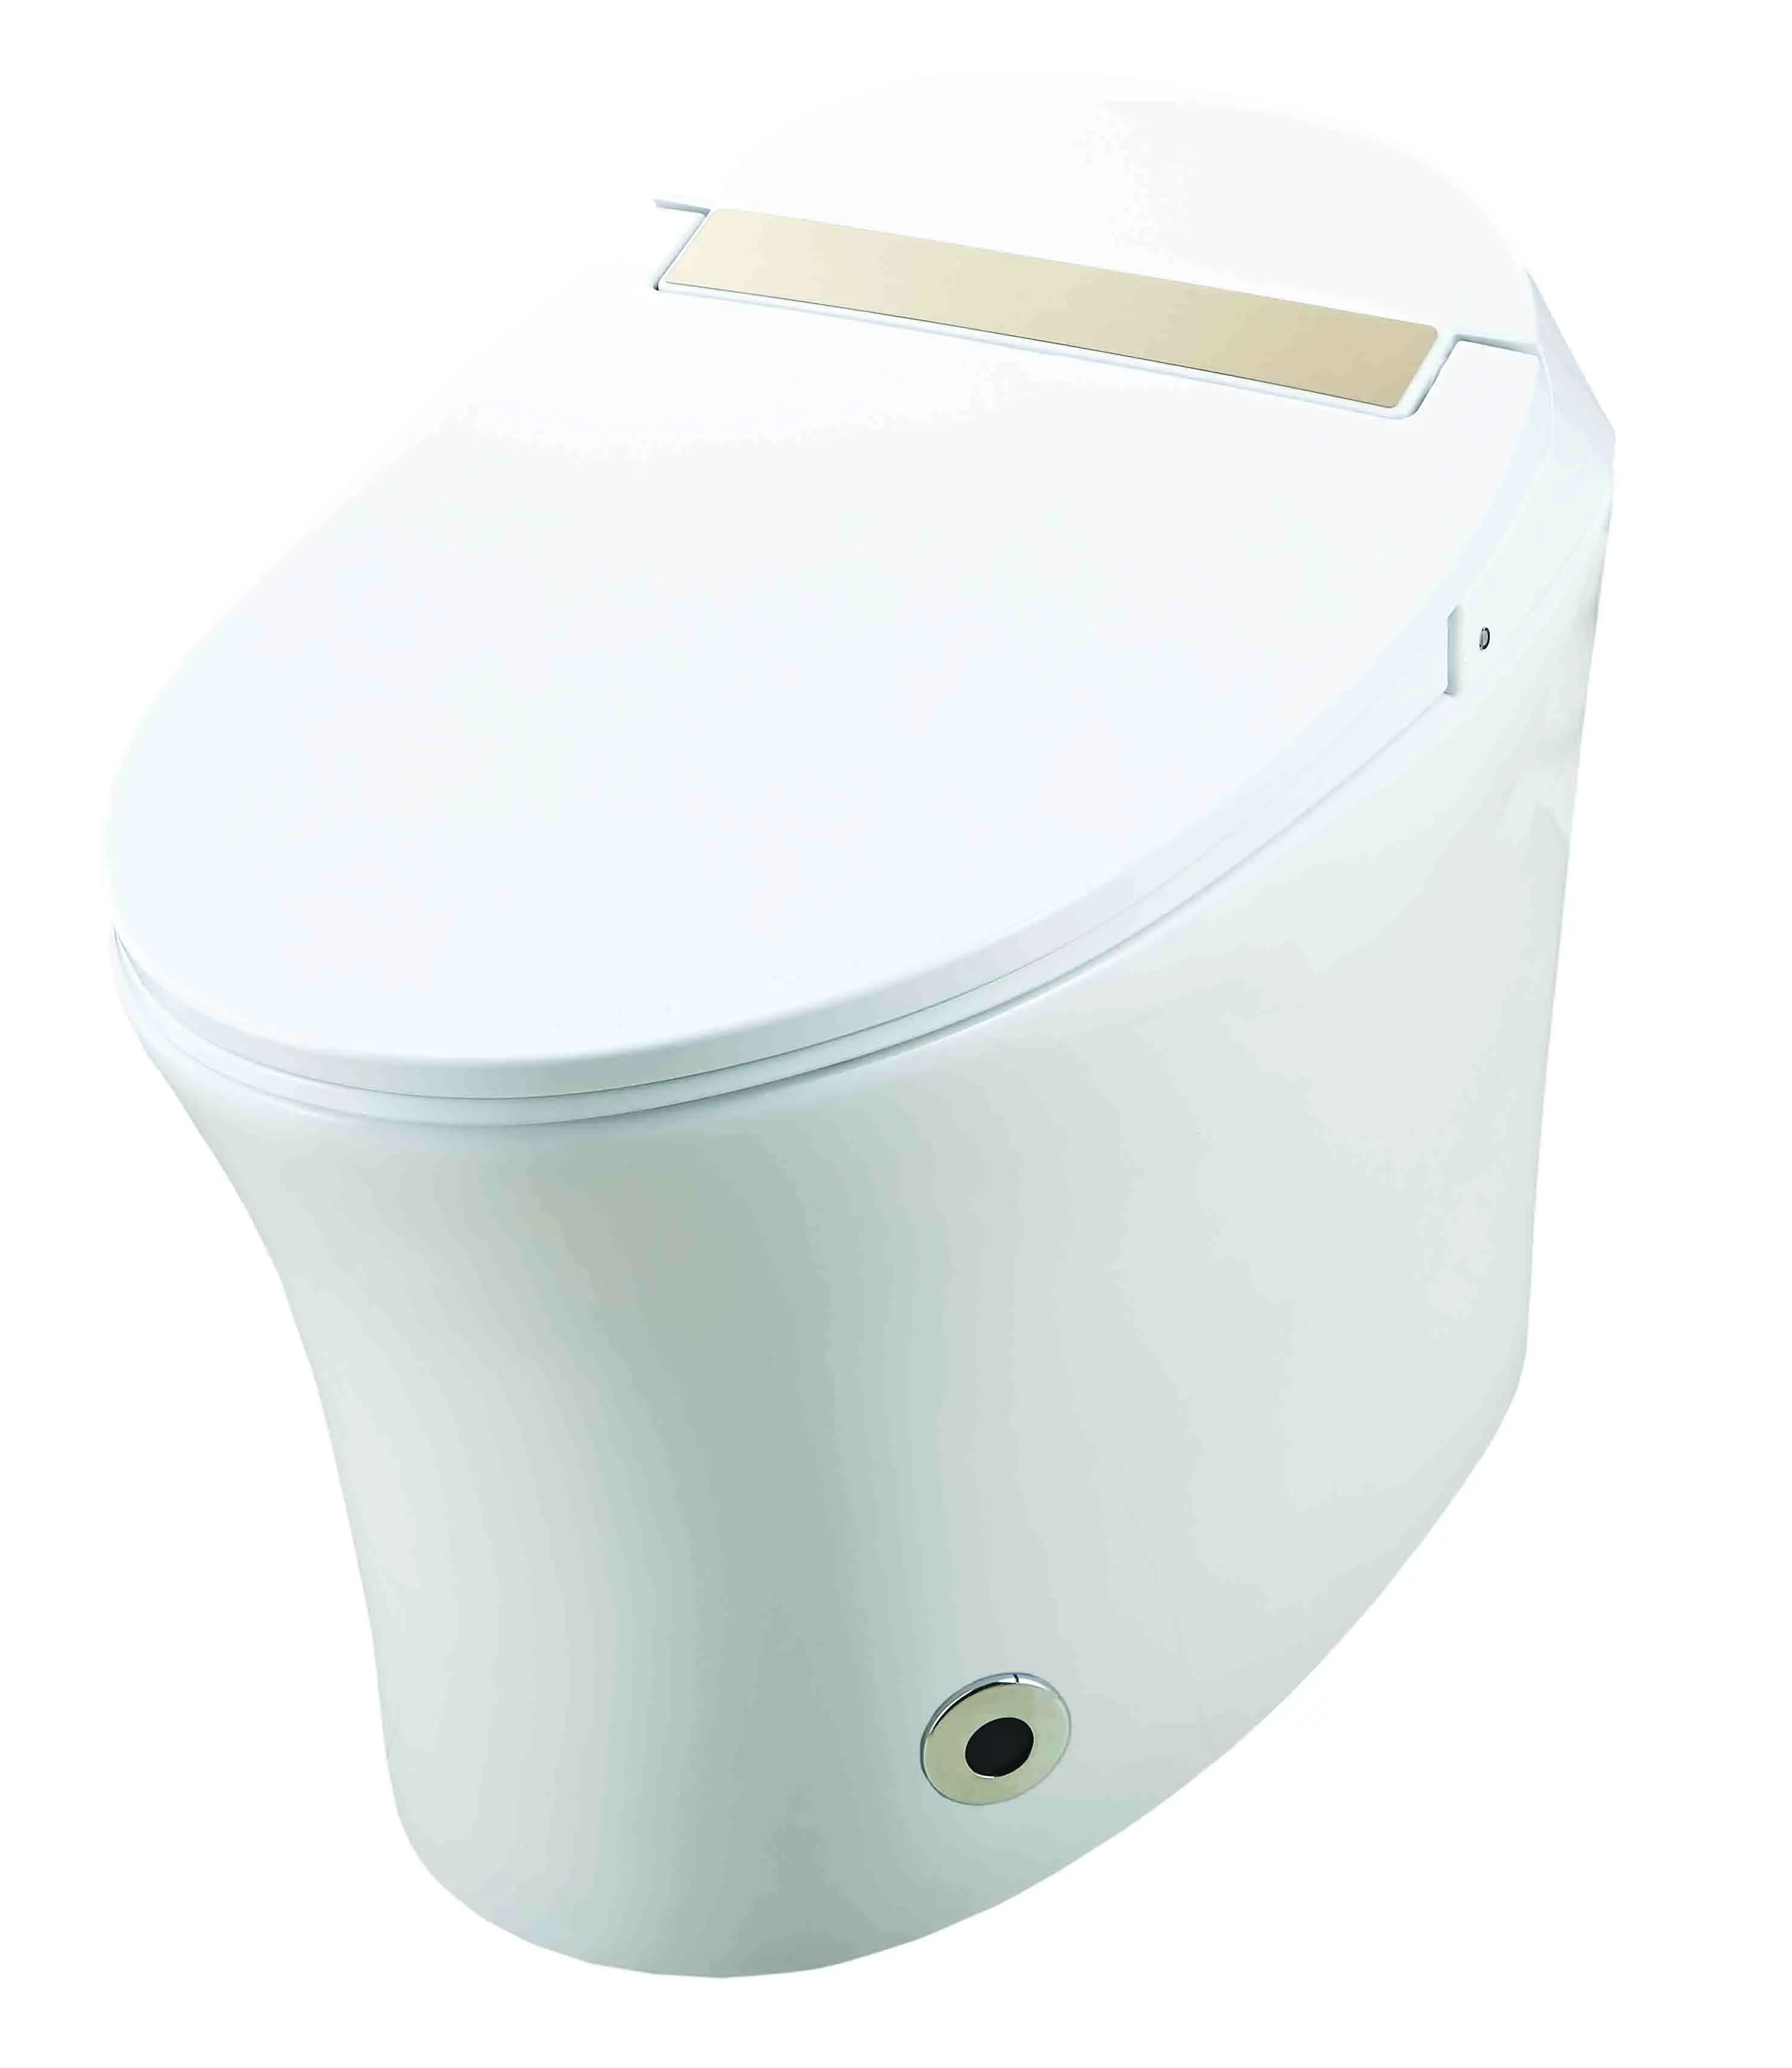 Electric wc gold intelligent bidet smart toilet without tank